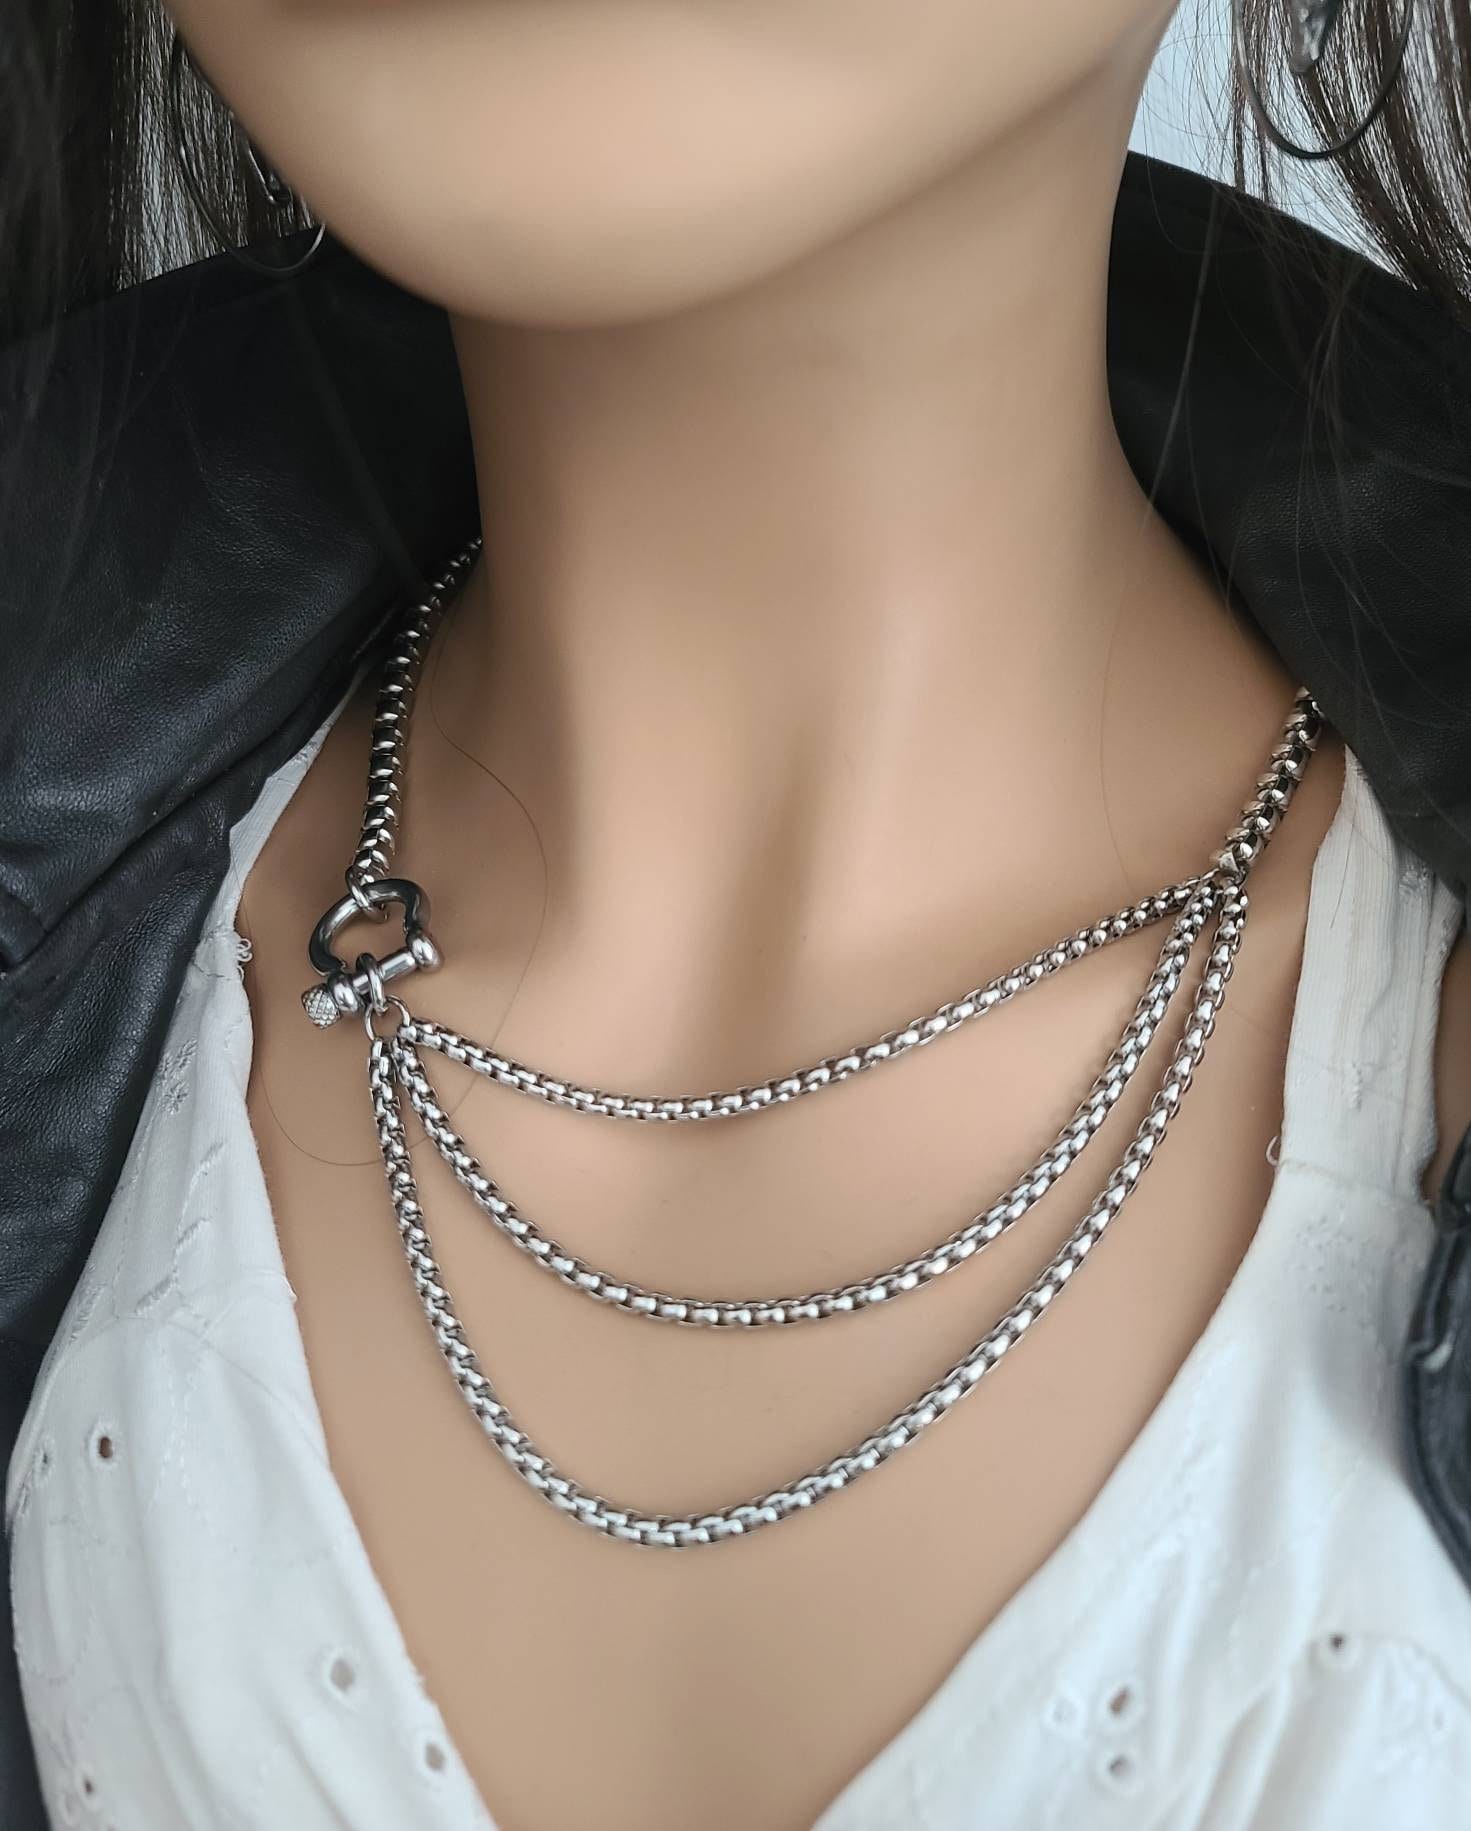 Women Punk Necklace,Short Thick Clavicle Chain,Punk Style Link Chain,Lock  Key Pendant Necklace,Girl Choker Necklace by Hi.FANCY